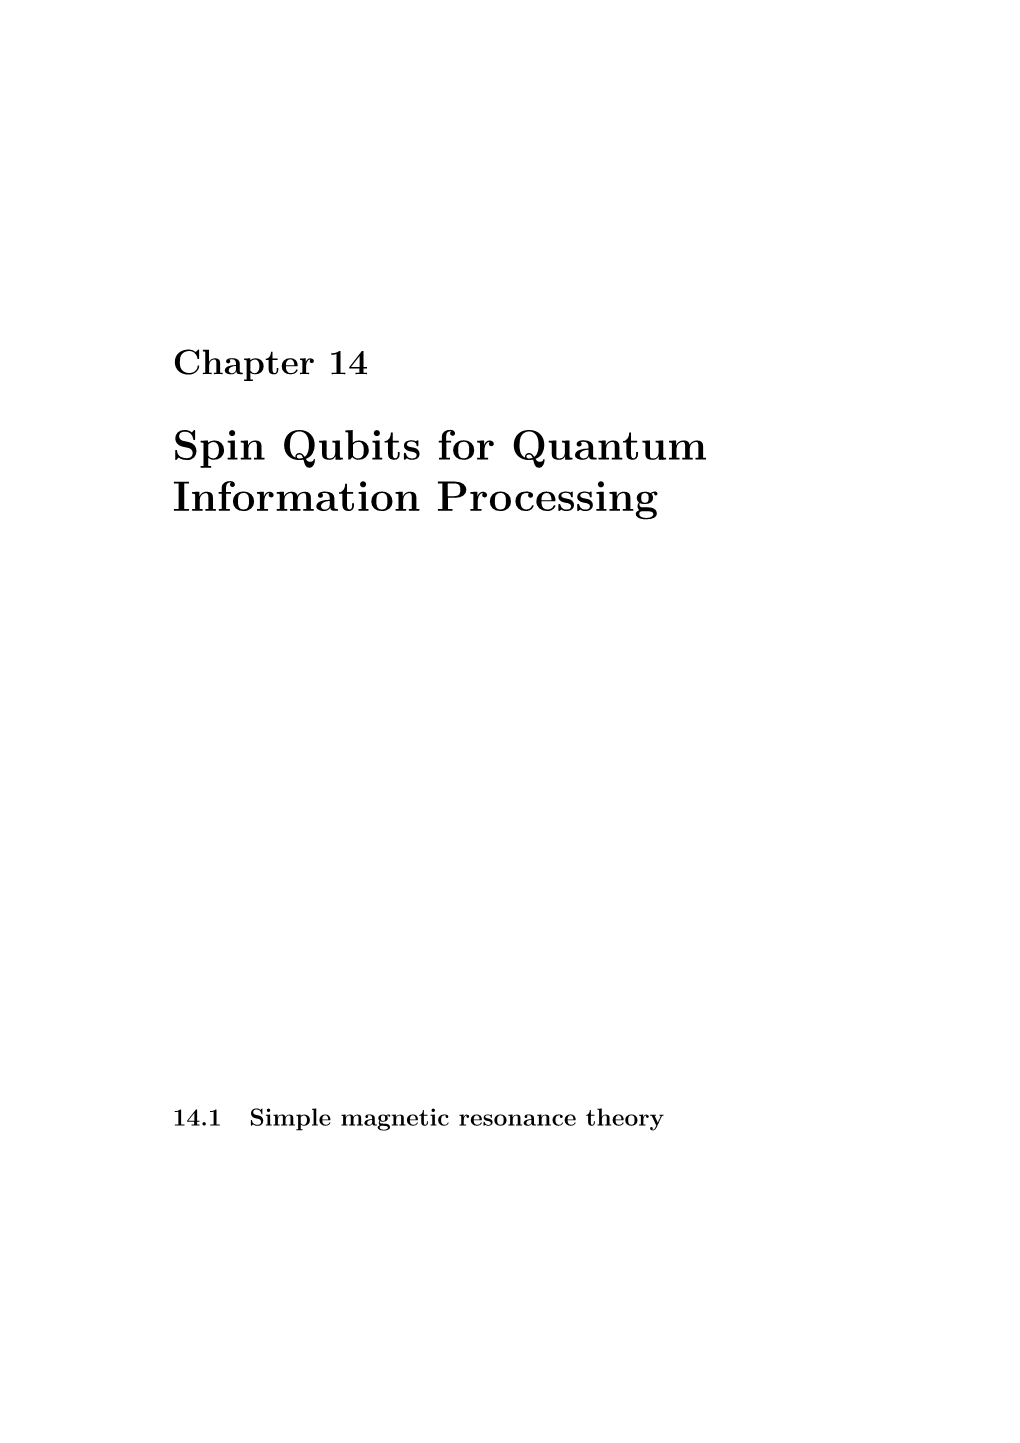 Chapter 14 Spin Qubits for Quantum Information Processing